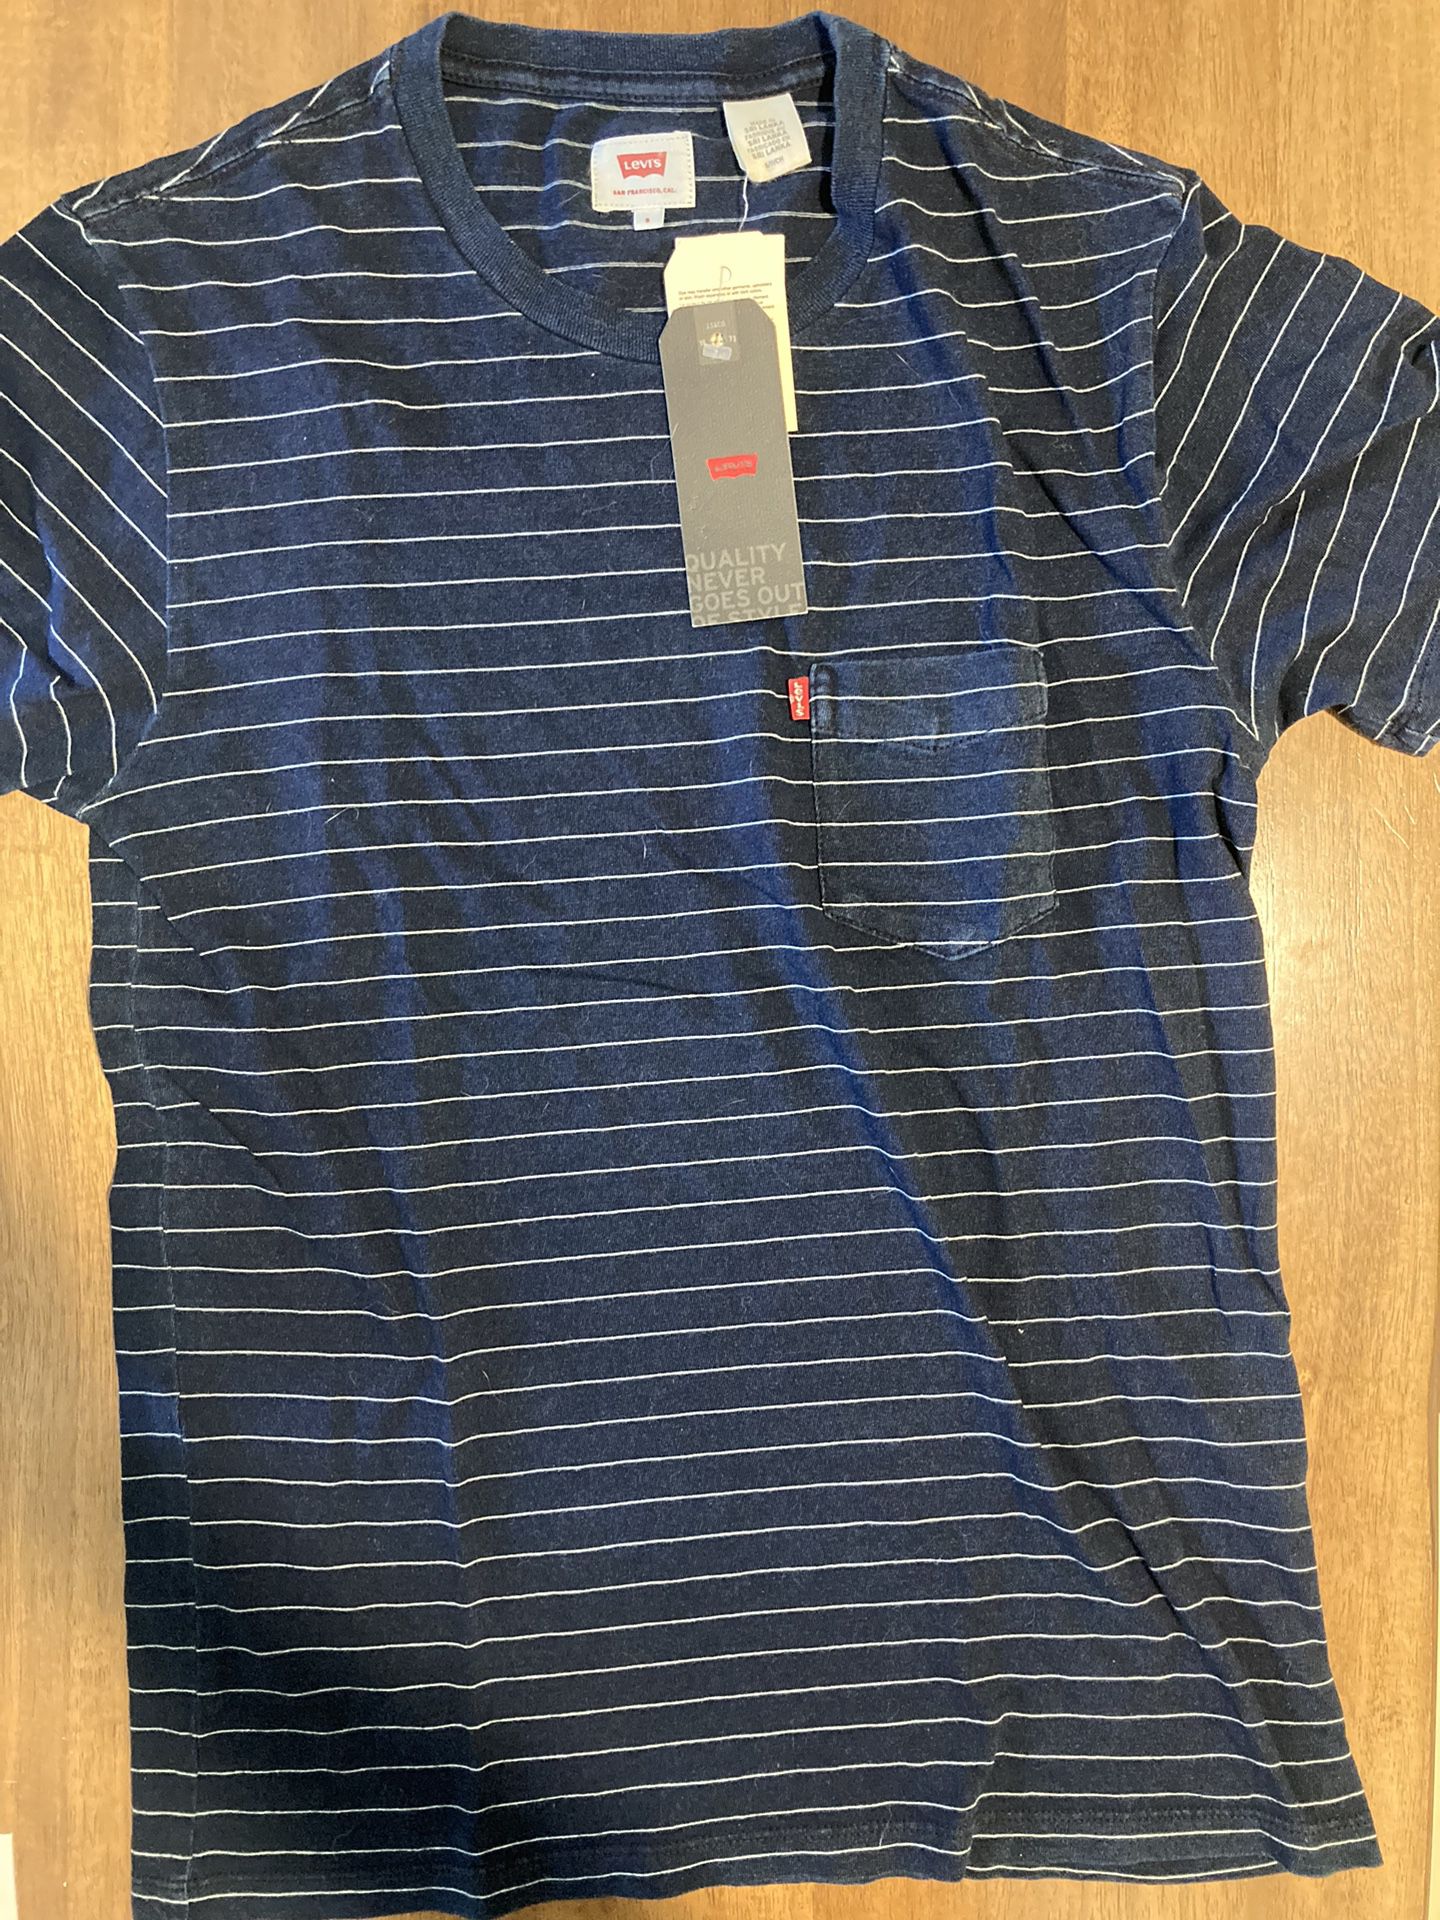 Levi’s Shirt, Indigo Color, Size Small, New with Tags